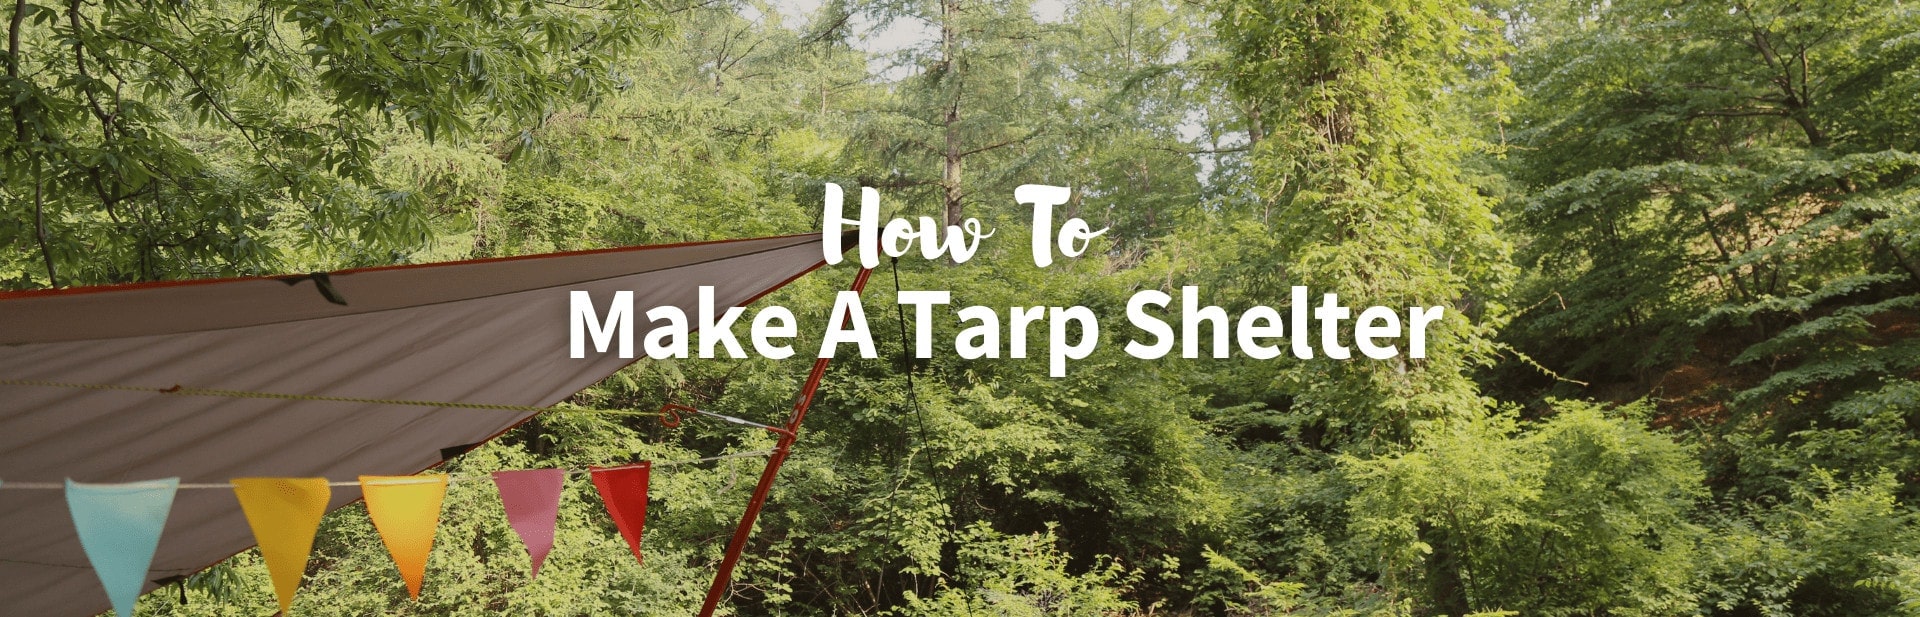 How to Make a Tarp Shelter Without Trees